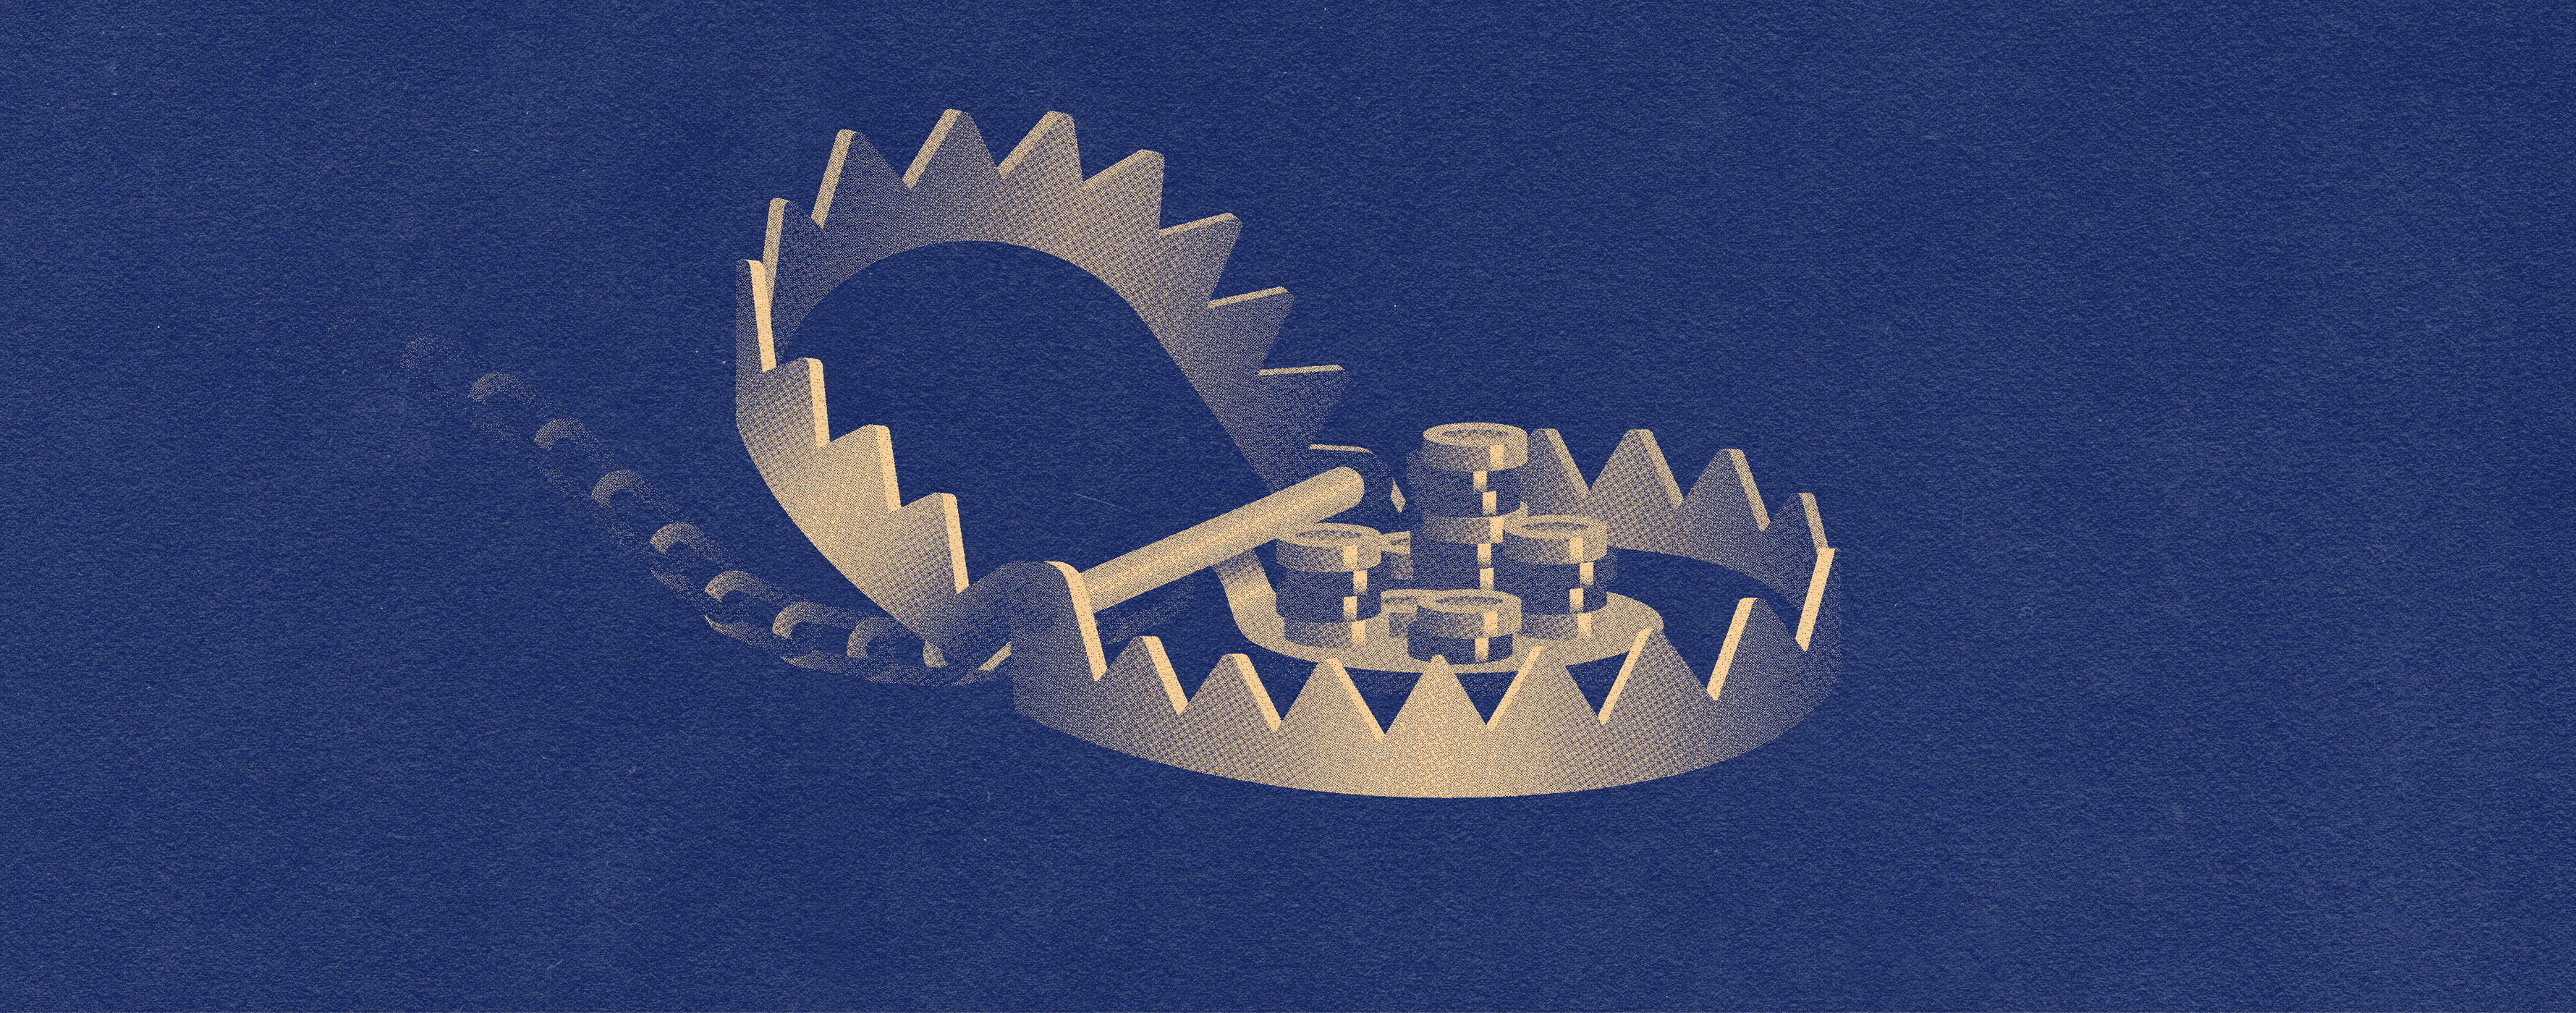 stylized graphic of a bear trap